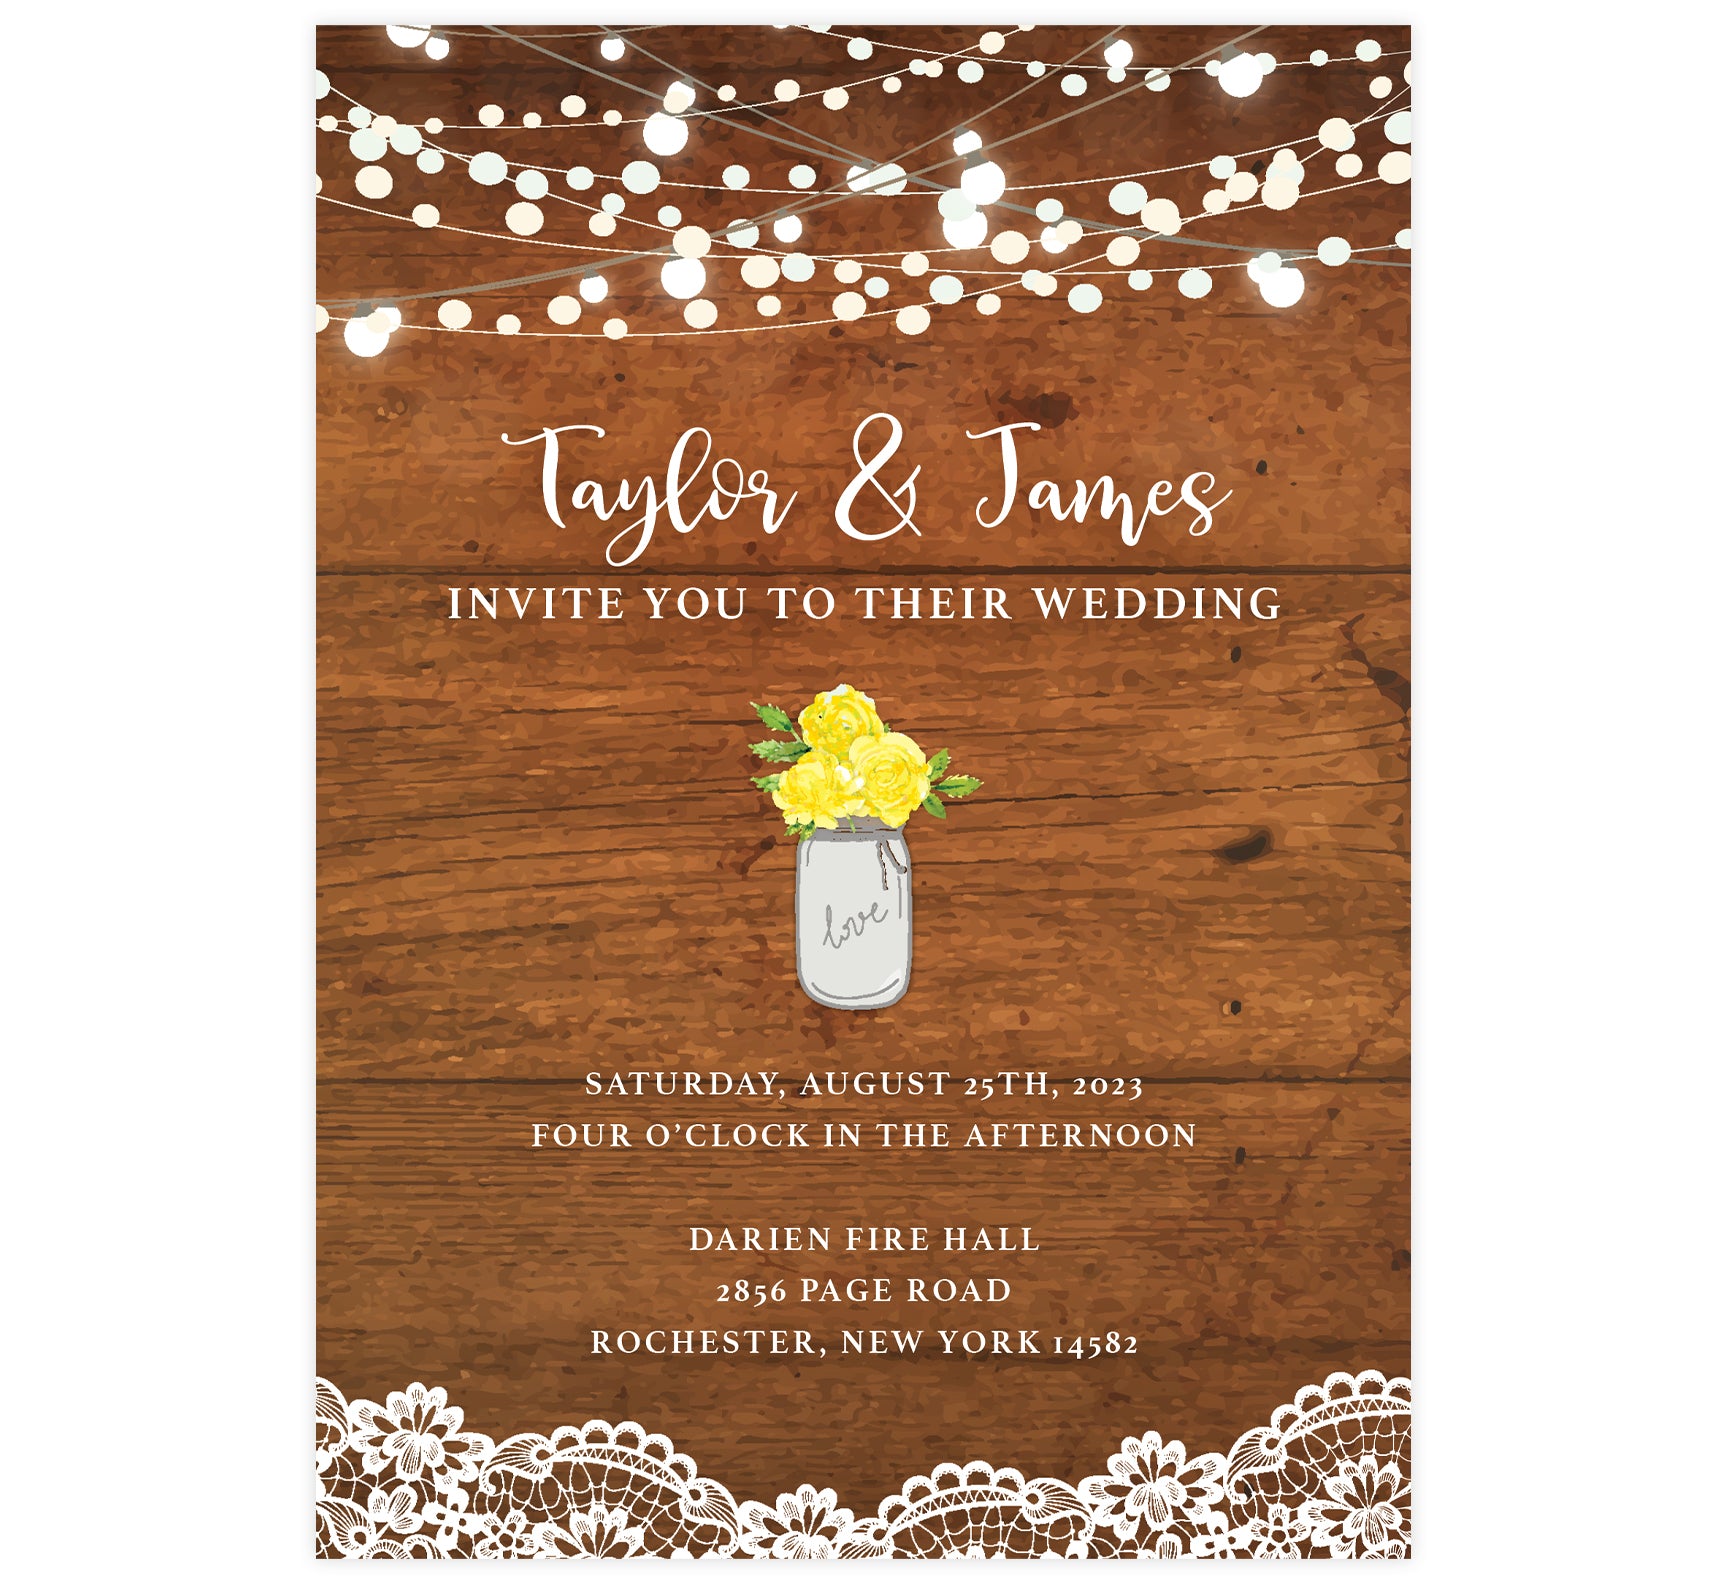 Rustic Glow wedding invitation; woodgrain background with string lights at the top, lace at the bottom edge. White text and yellow flowers